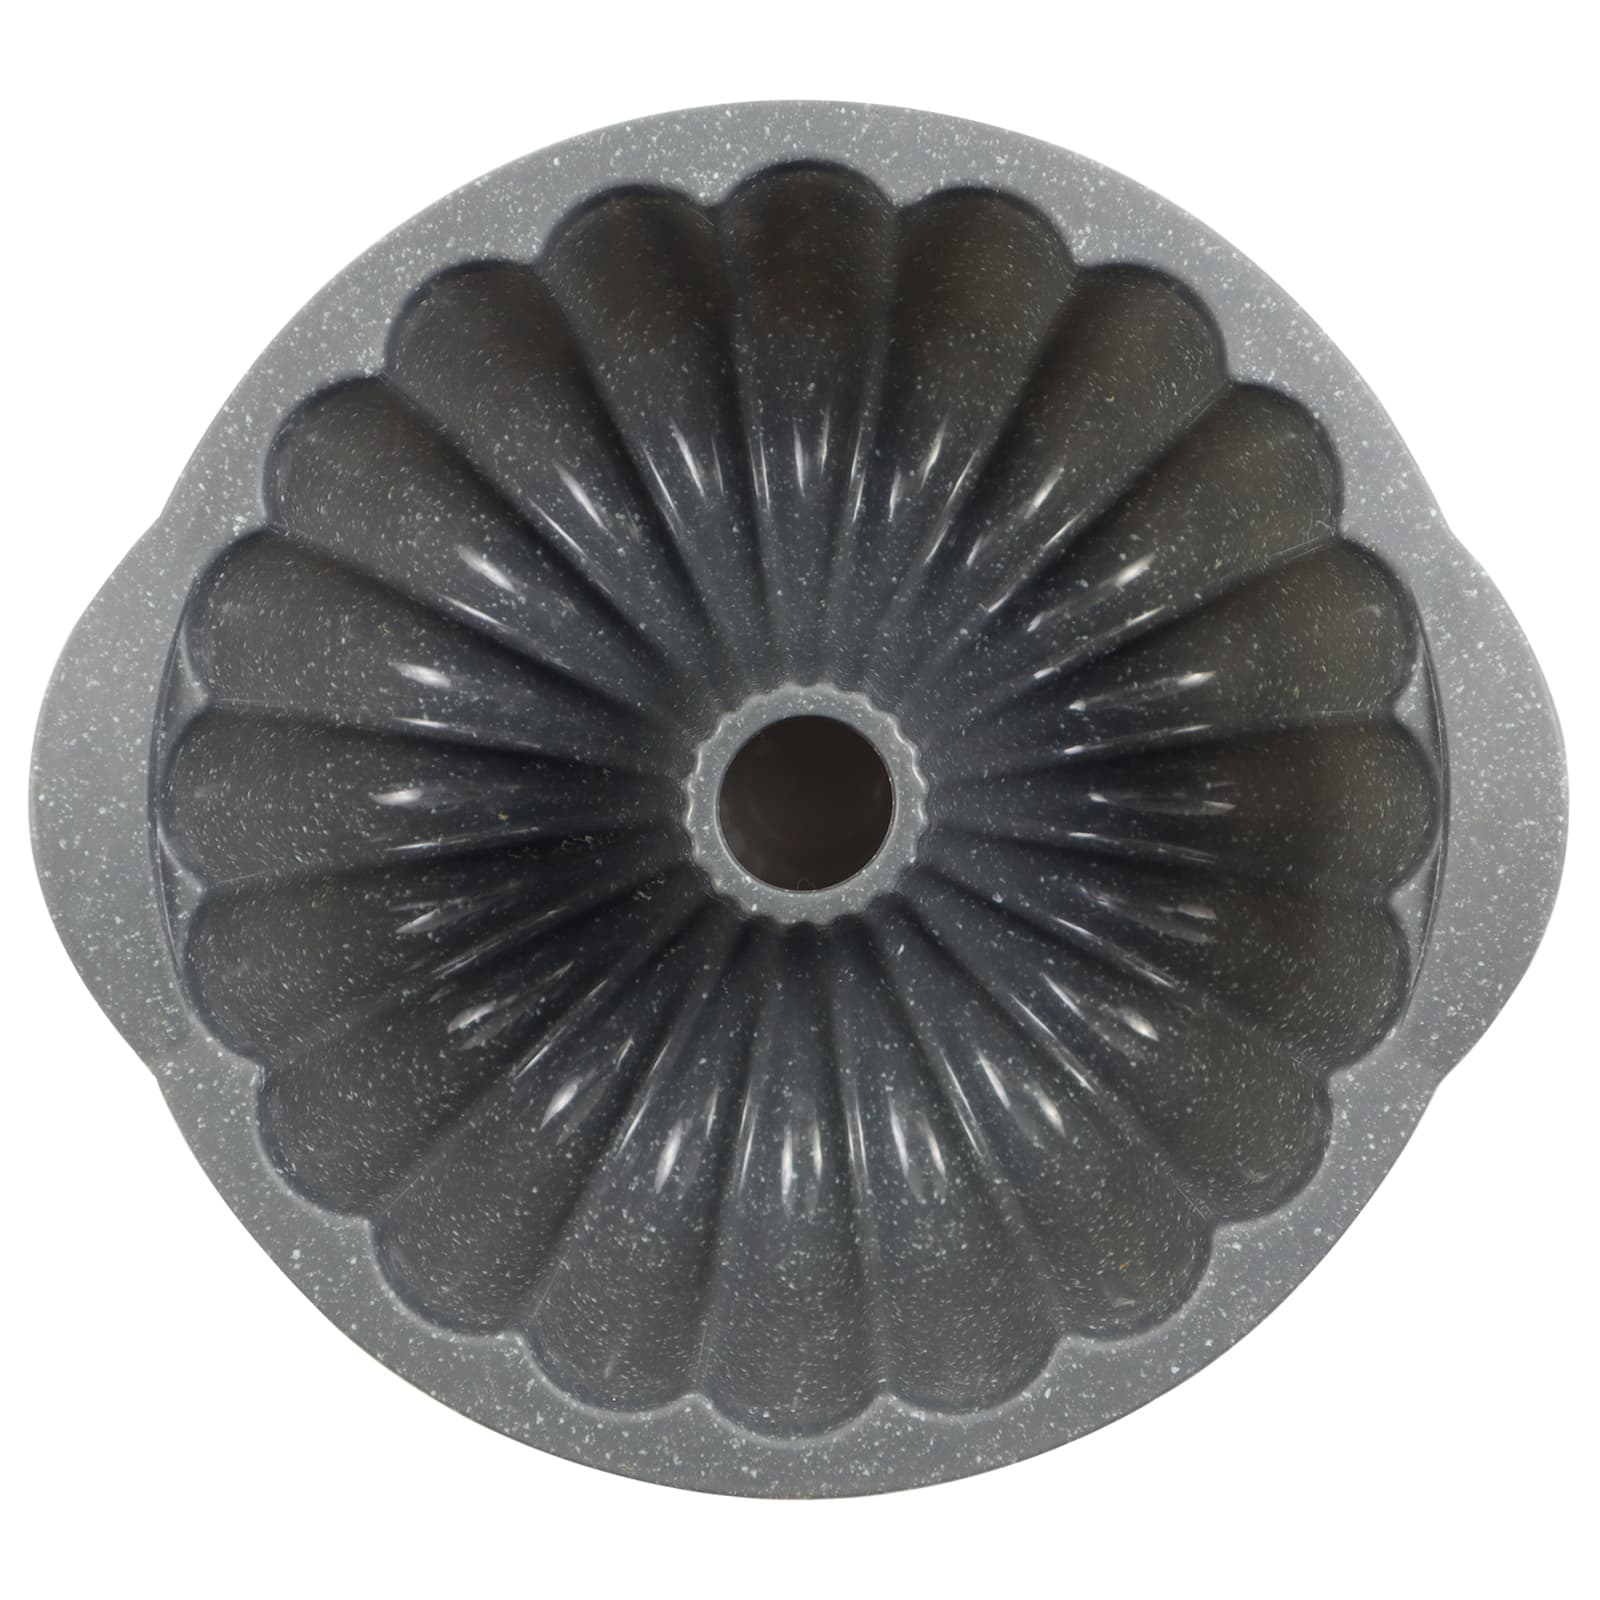 Silicone Cake Pan with Metal Reinforced Frame Whirlwind Nest